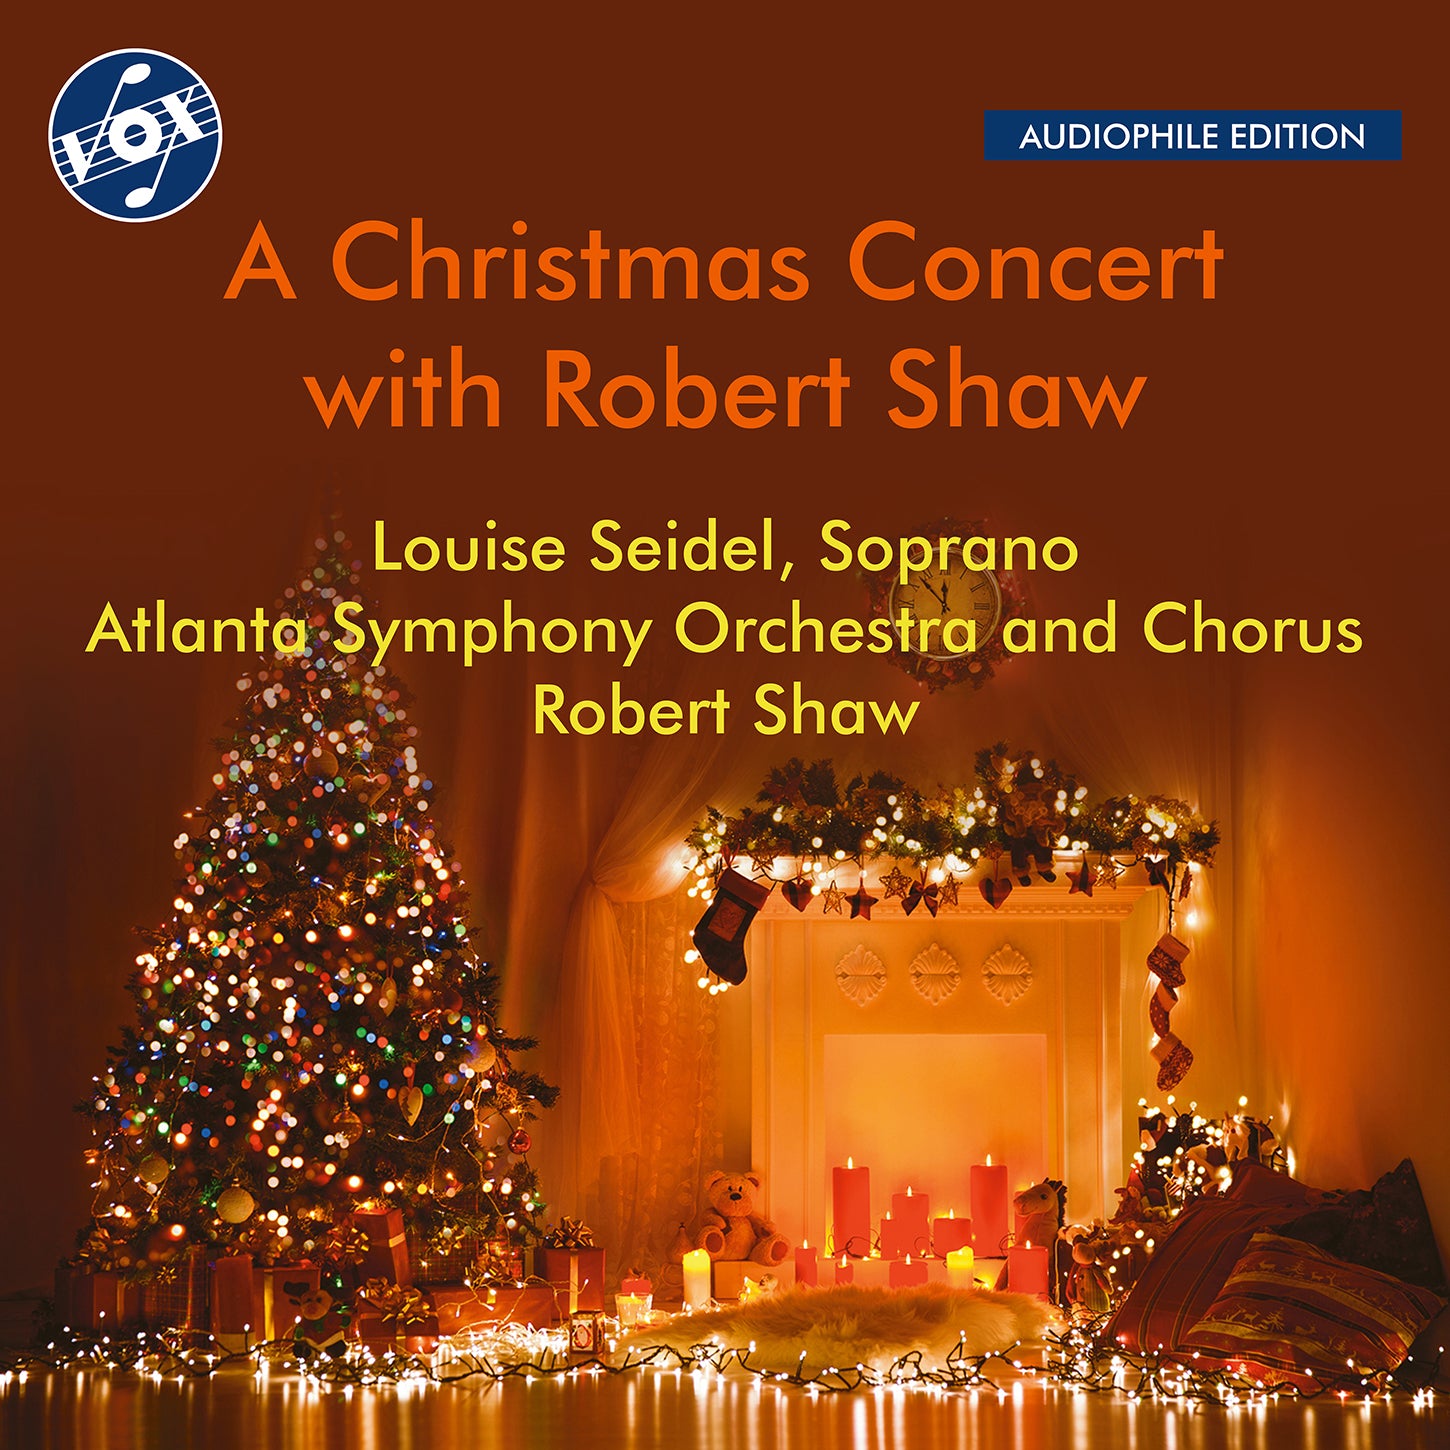 A Christmas Concert with Robert Shaw